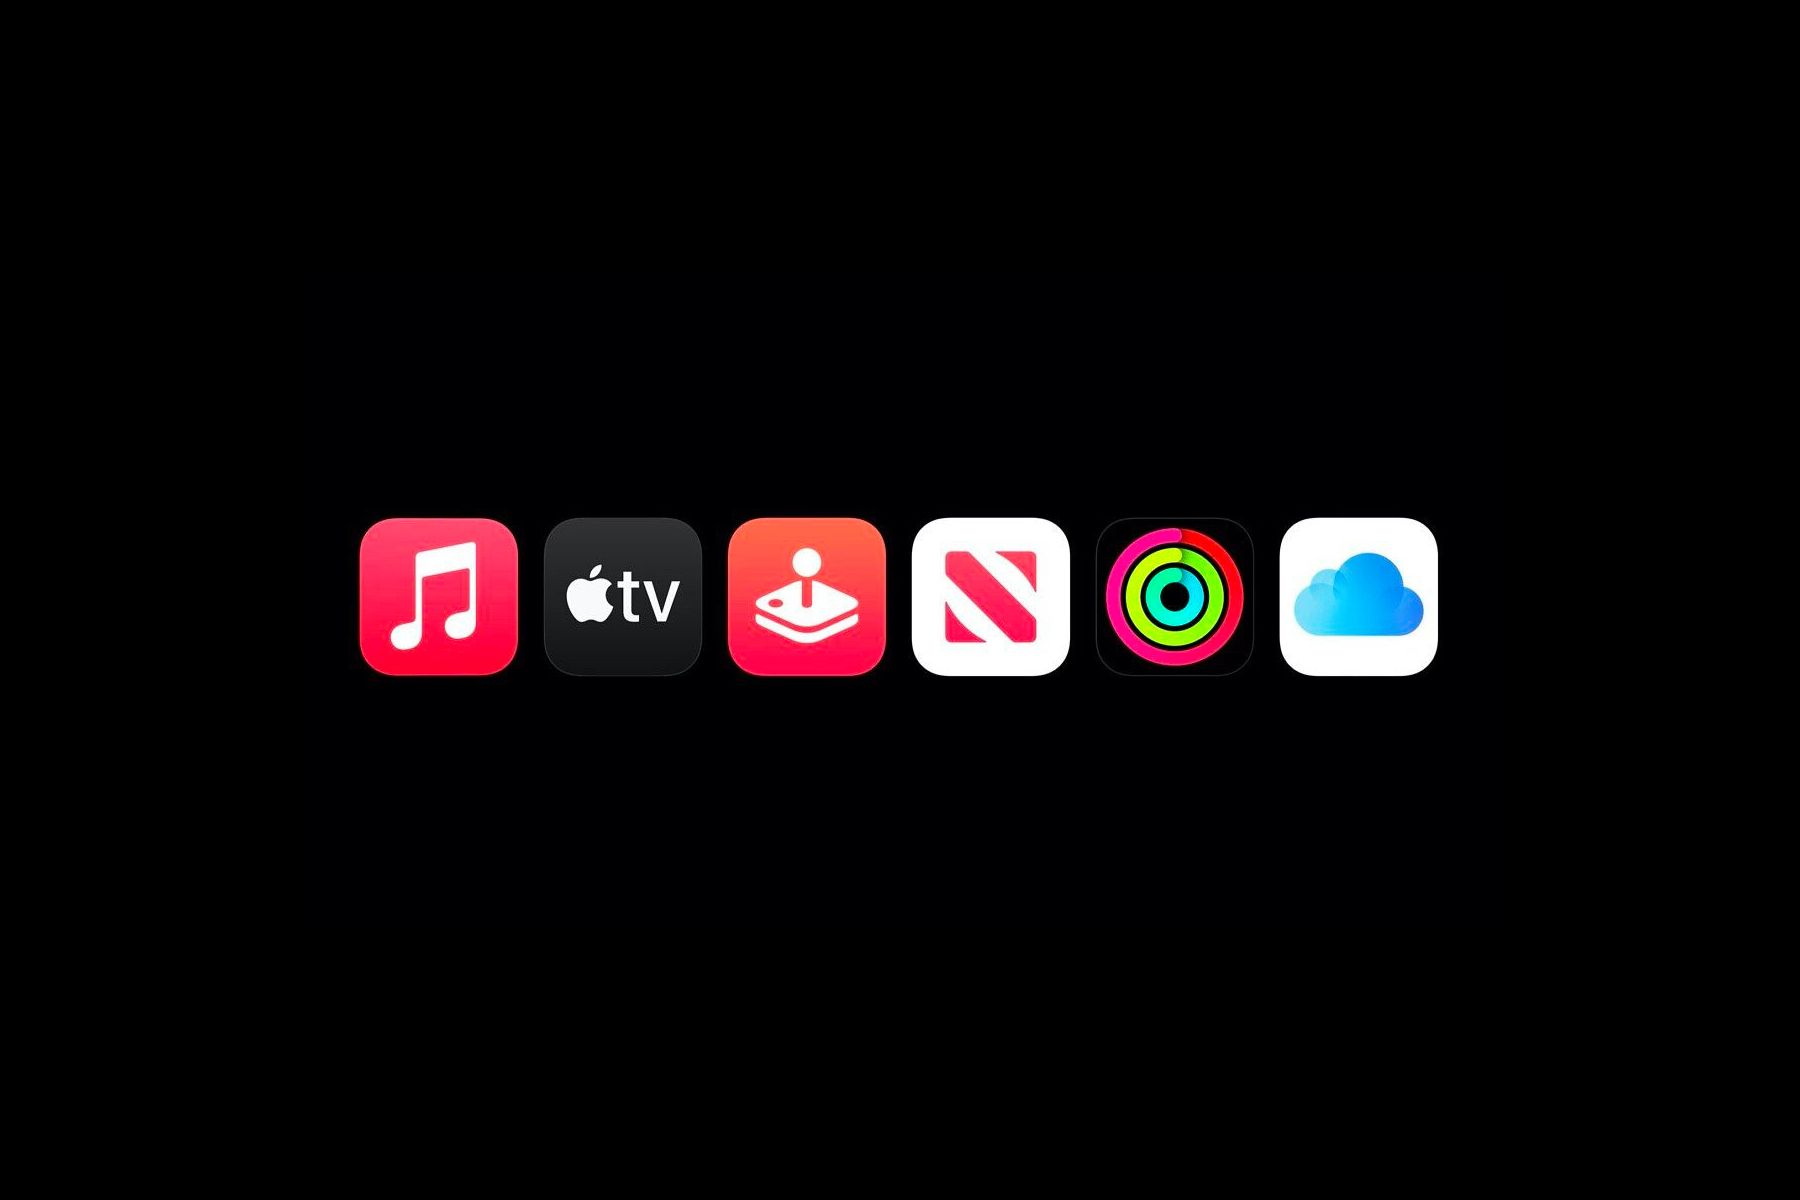 icons of Apple Services, including music, tv, arcade, news, fitness, and iCloud